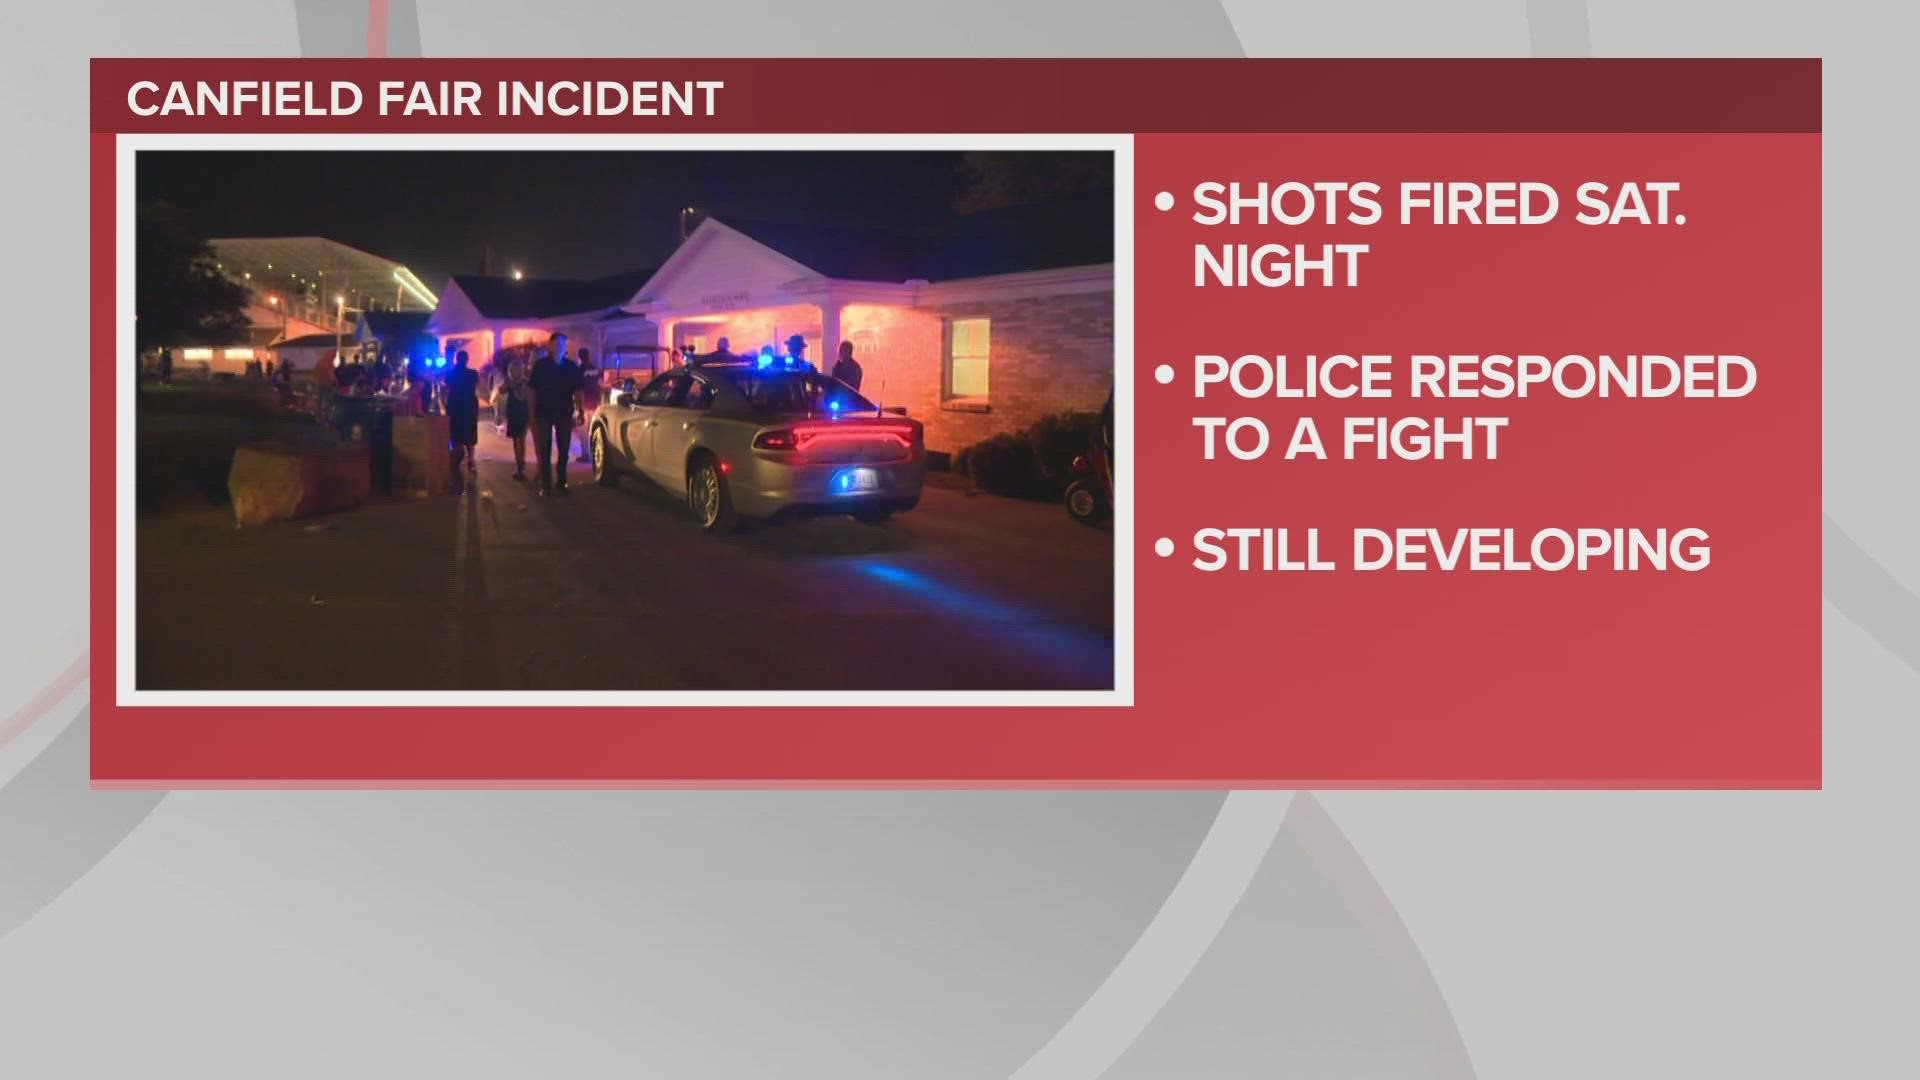 Fair officials confirmed to NBC affiliate WFMJ that a shooting happened after a fight broke out at the Canfield Fair.